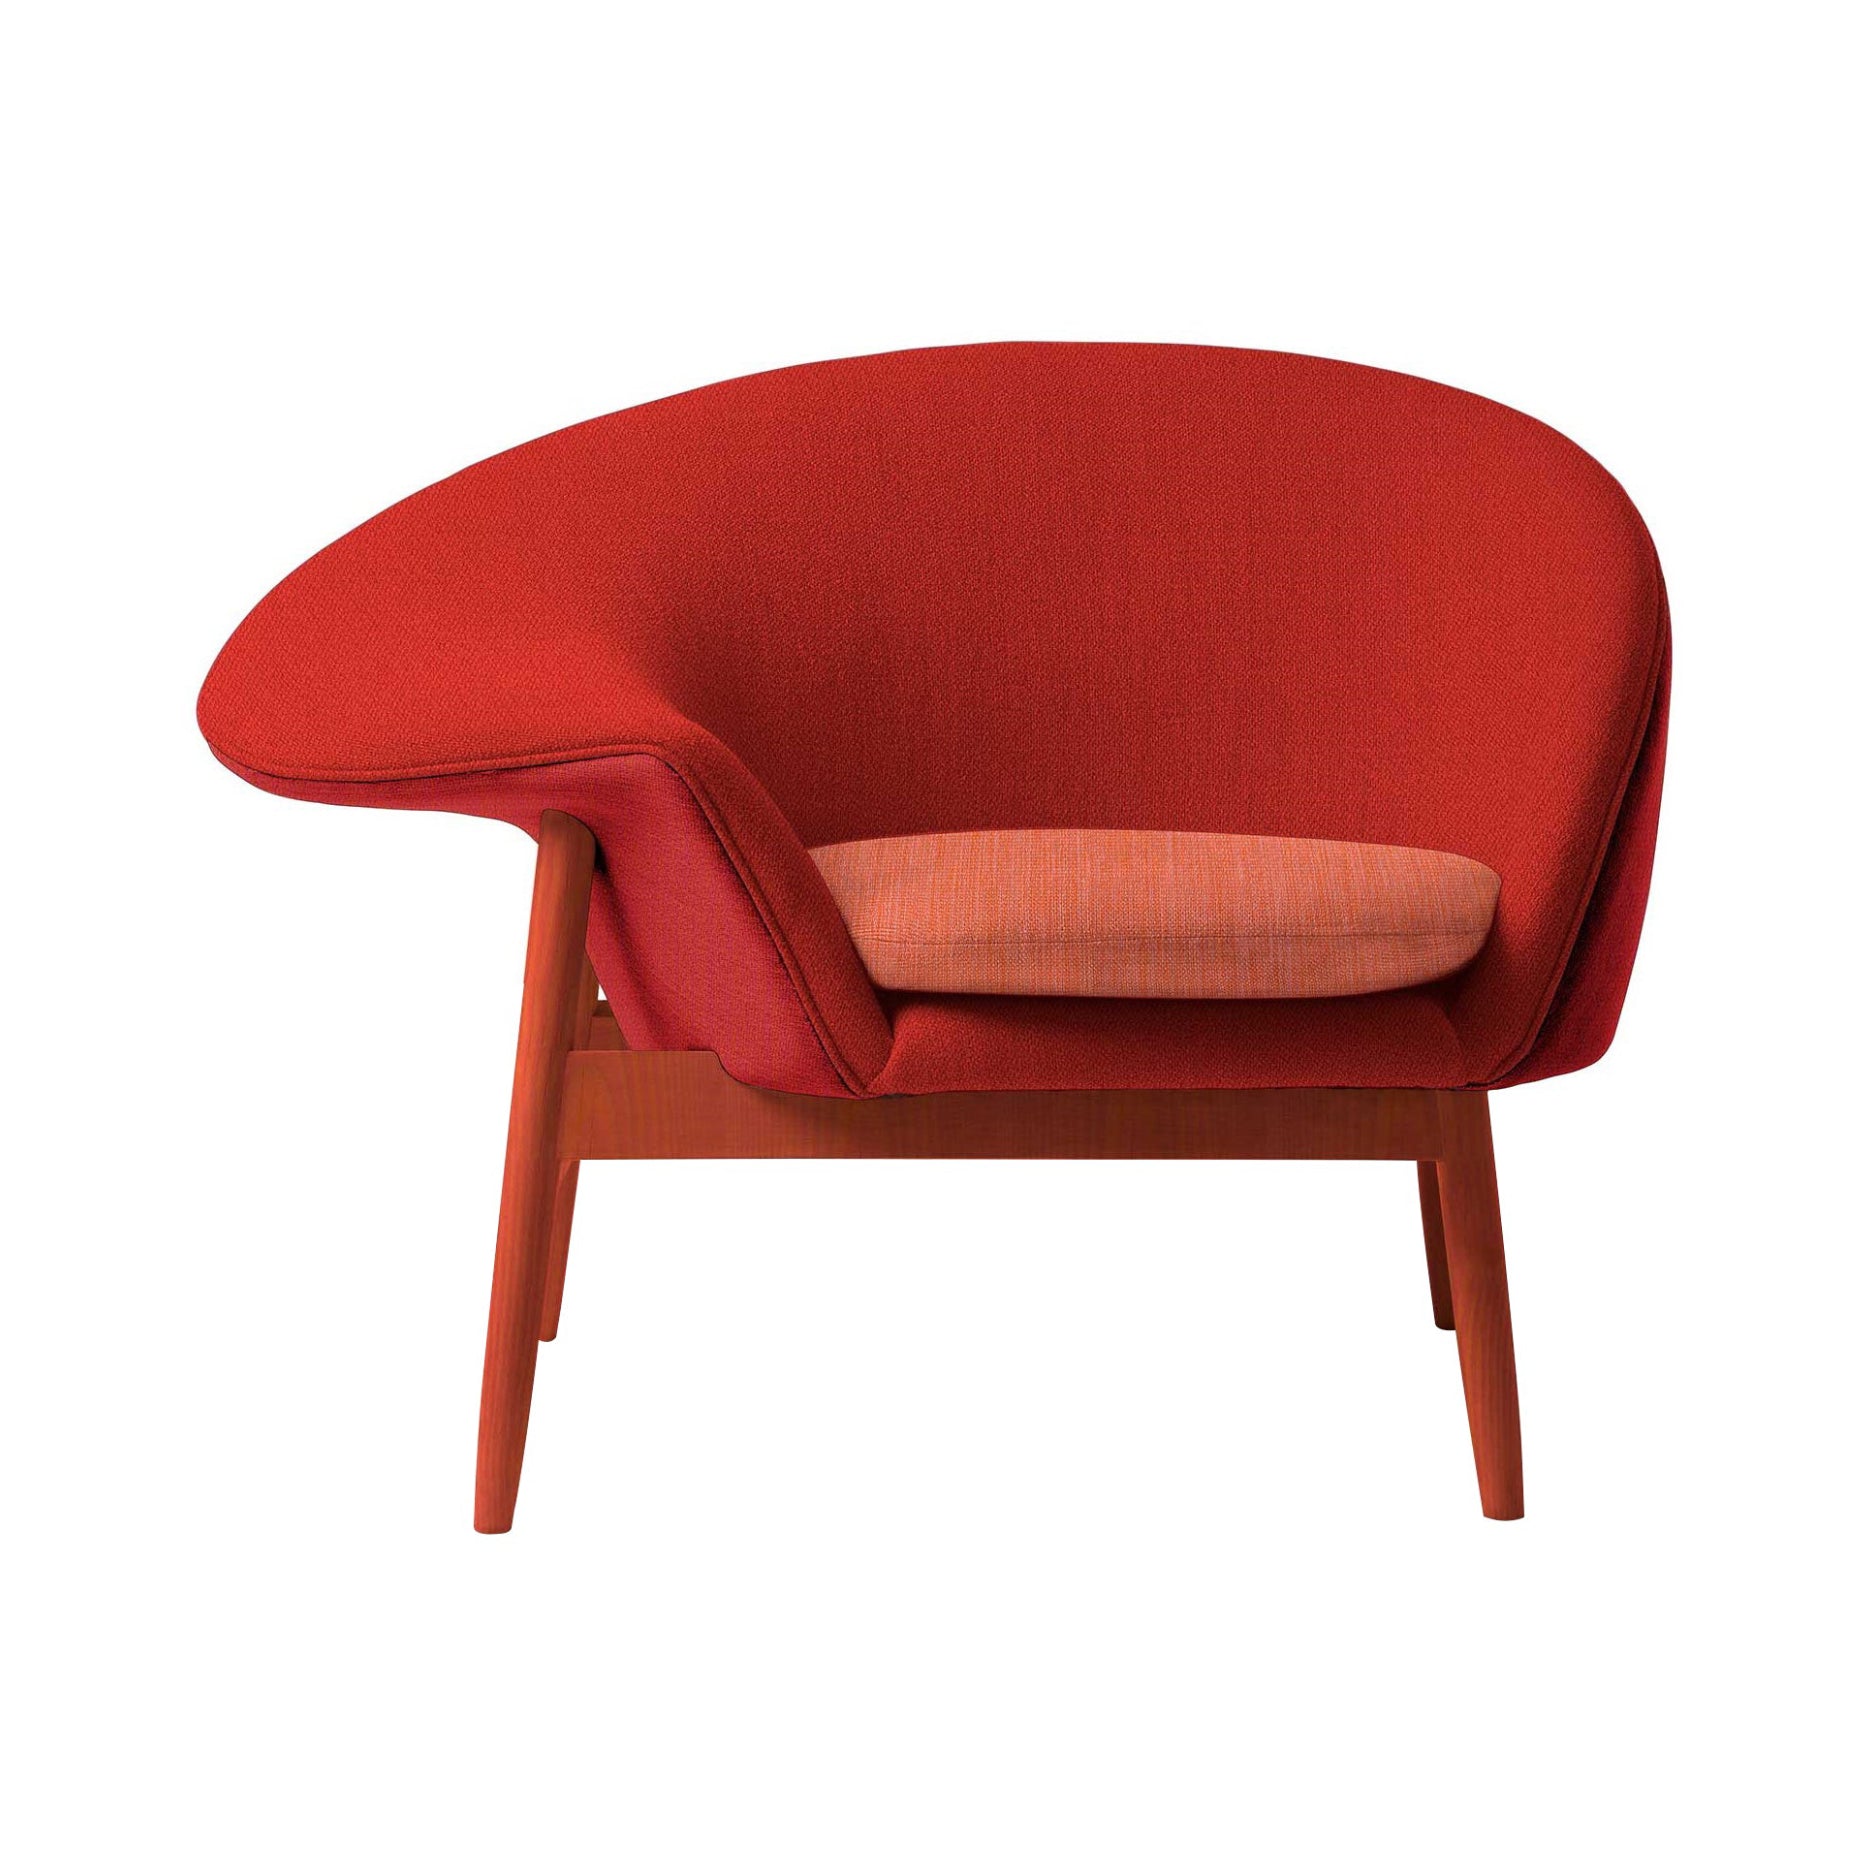 Fried Egg Lounge Chair: Color + Left + Red